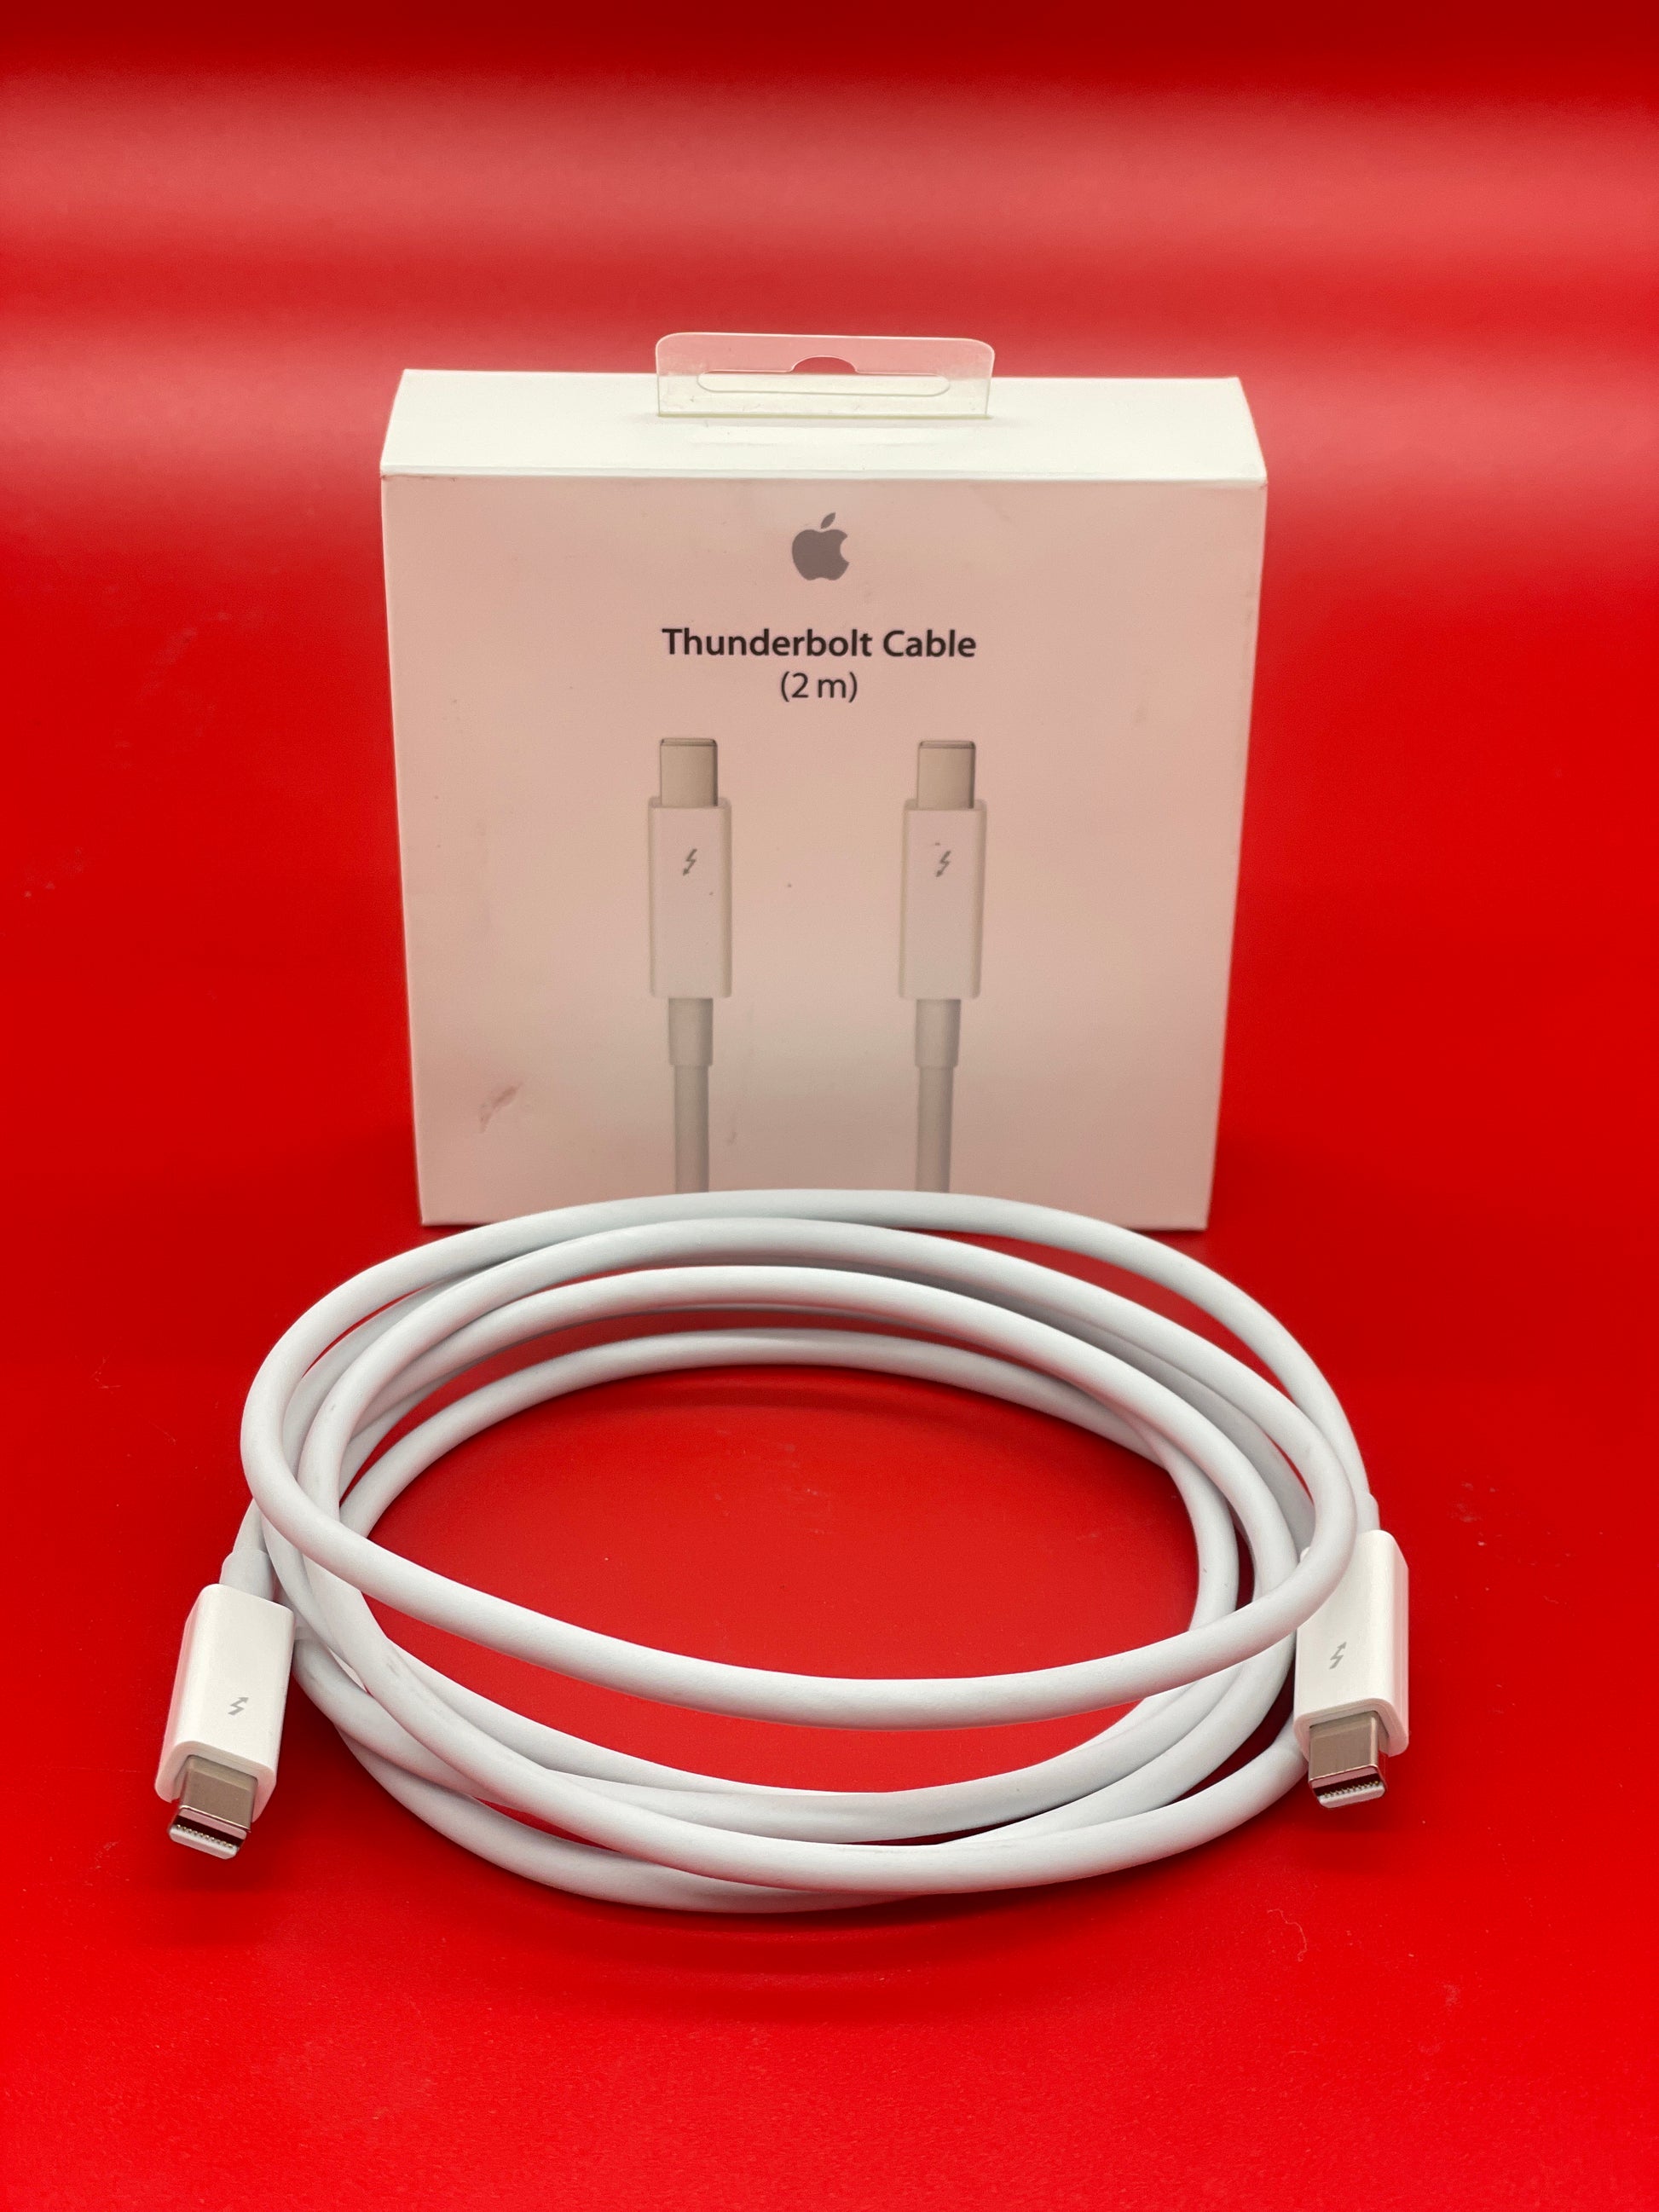 Apple Thunderbolt Cable (2.0 m) White MD861LL/A - Best Buy